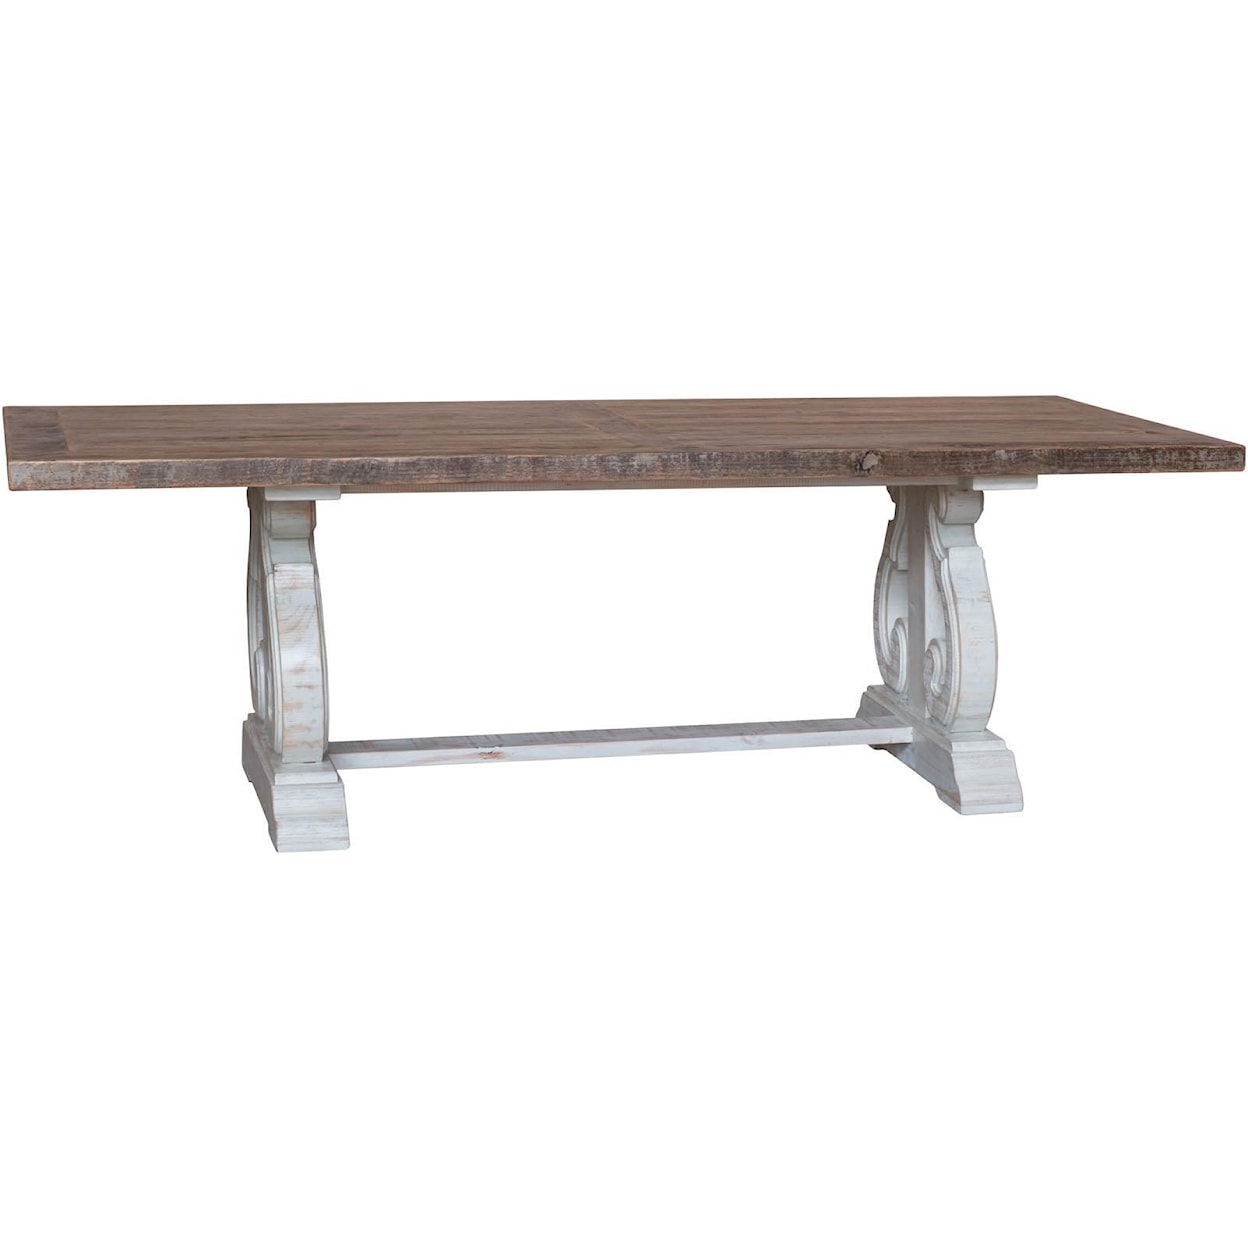 Furniture Source International Occasional Tables Heidel Dining Table